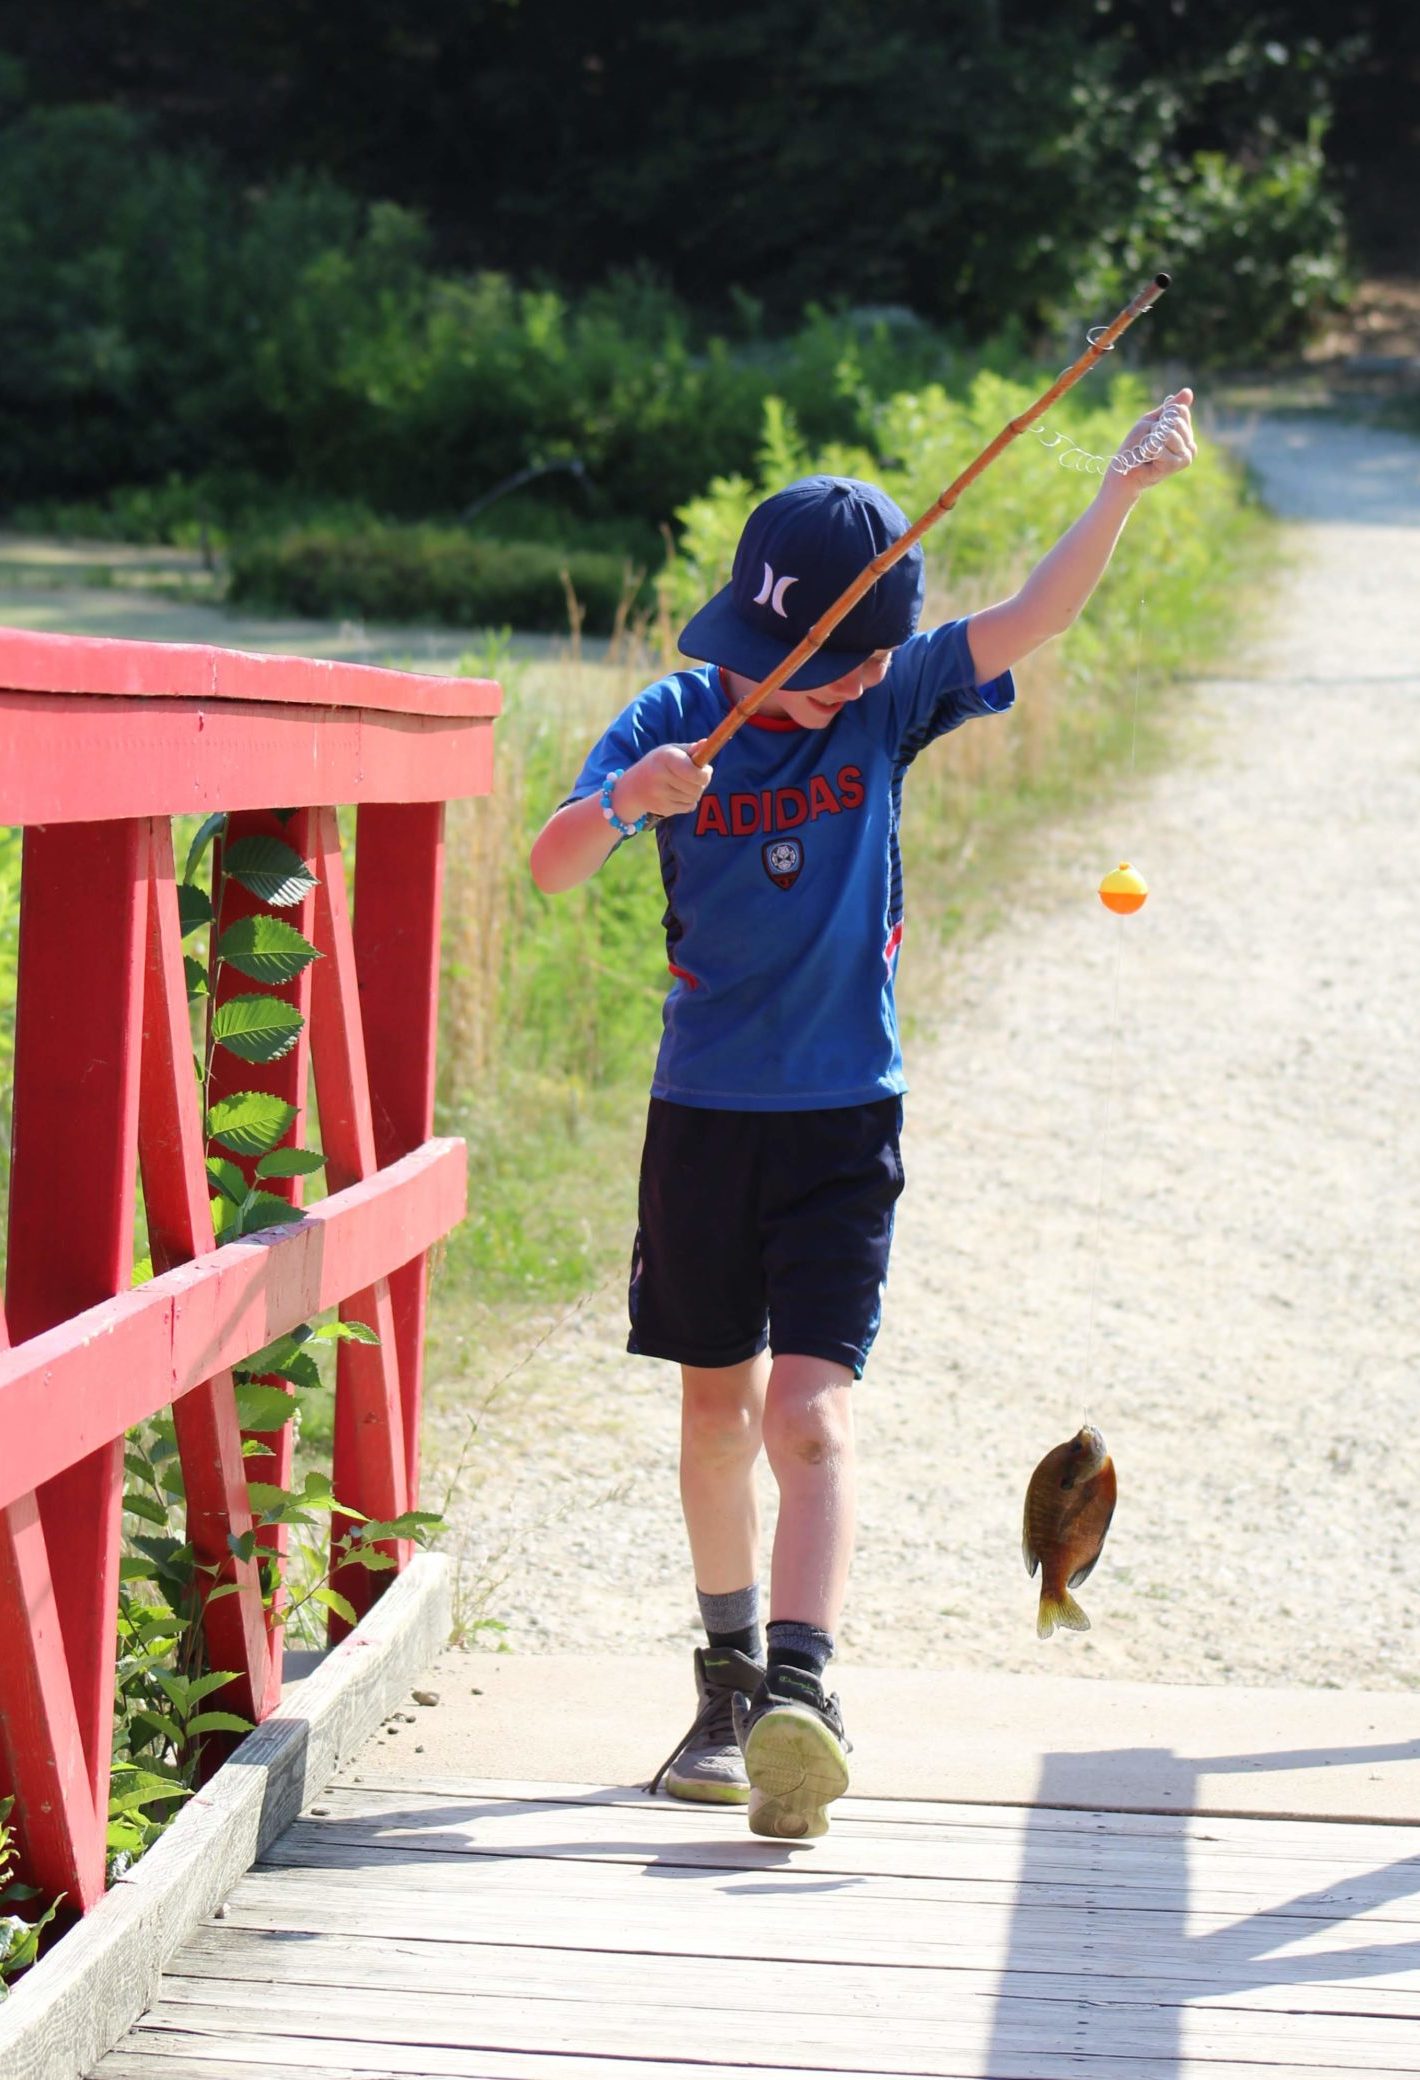 Among other activities, Wildwood campers learn to fish!